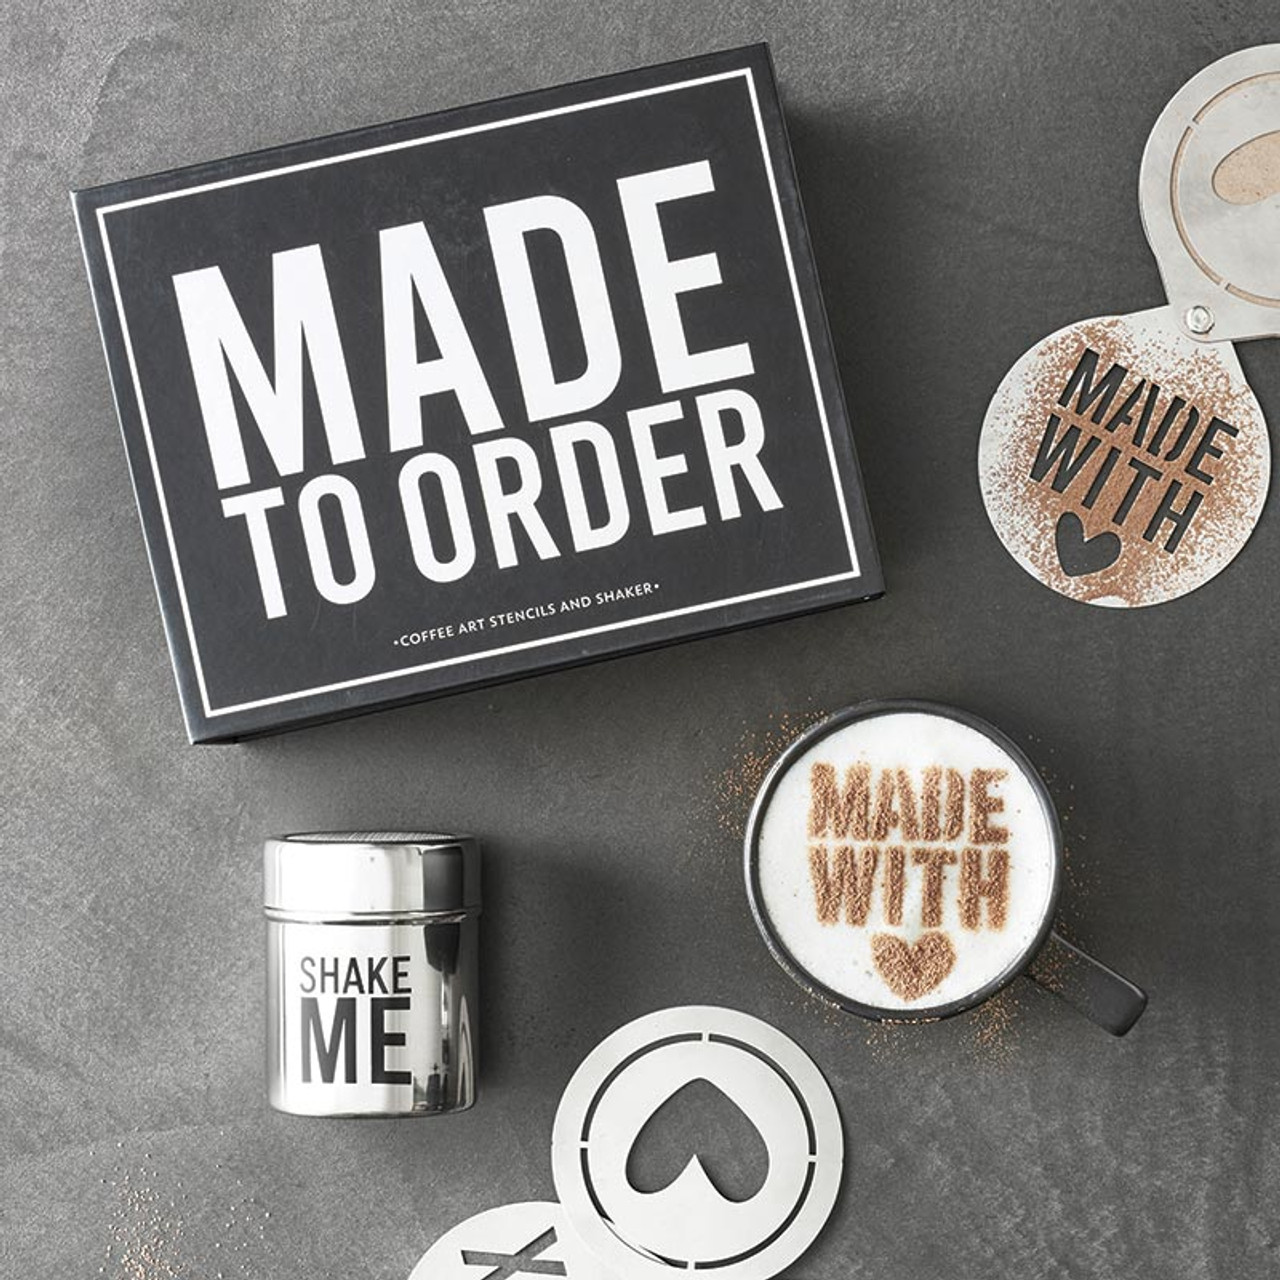 Coffee stencils custom made from your logo, text or design